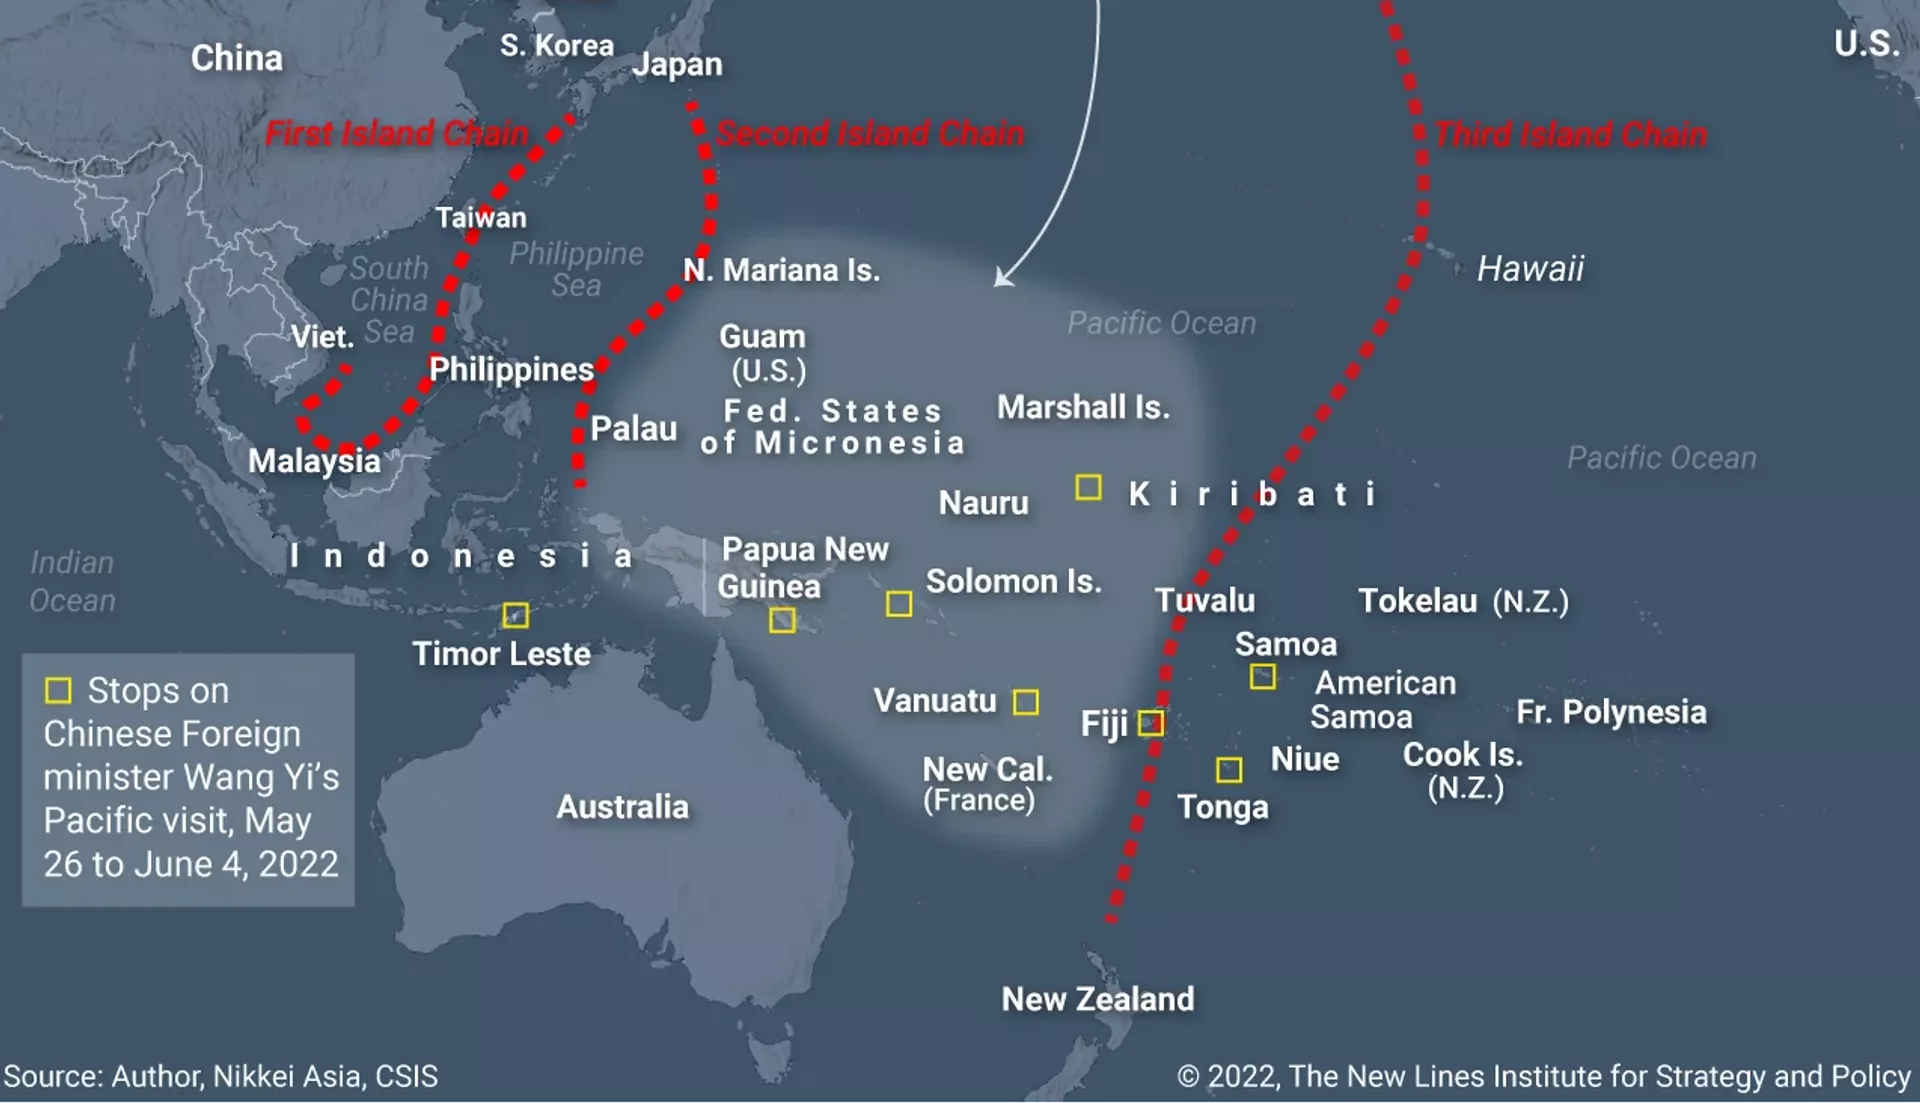 Excerpt from New Lines Institute for Strategy and Policy map showing the East Asian and Pacific Island nations at the faultlines of the US's so-called 'Island Chain Strategy', designed to hem China in militarily and commercially in its home shores. - Sputnik International, 1920, 22.04.2024